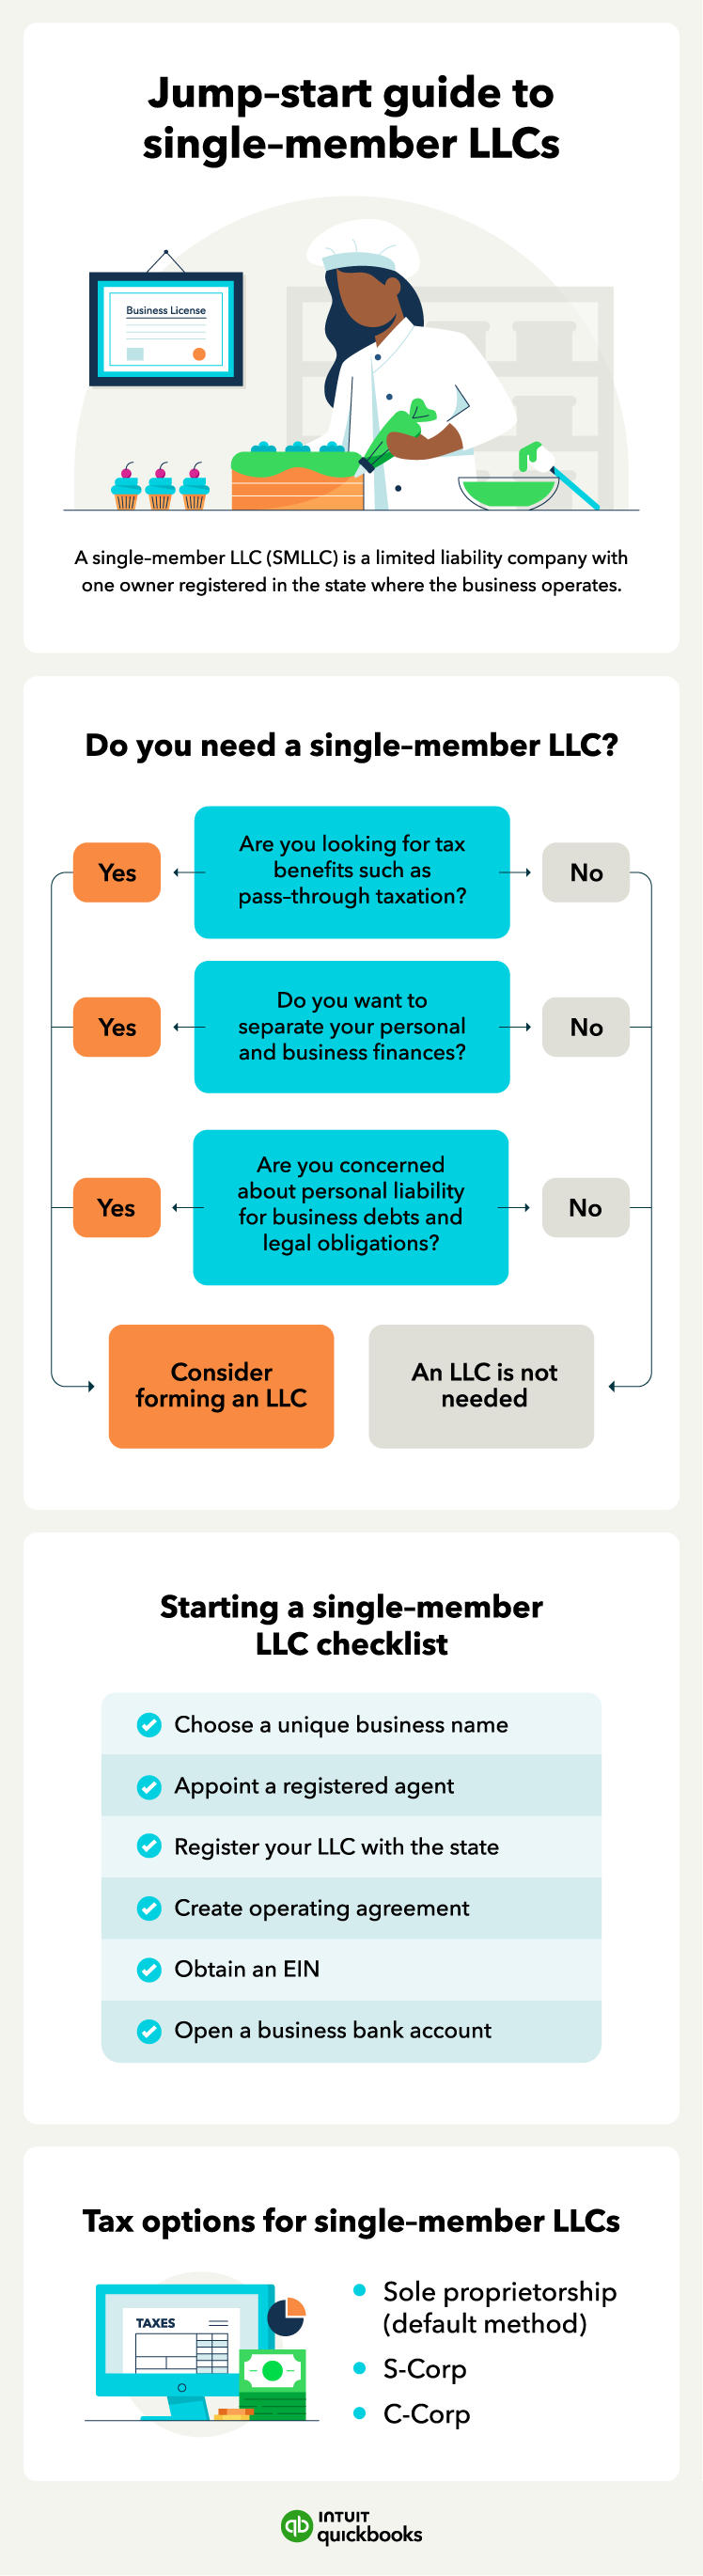 An infographic of a jump-start guide to single-member LLCs, such as deciding whether you need a single-member LLC.